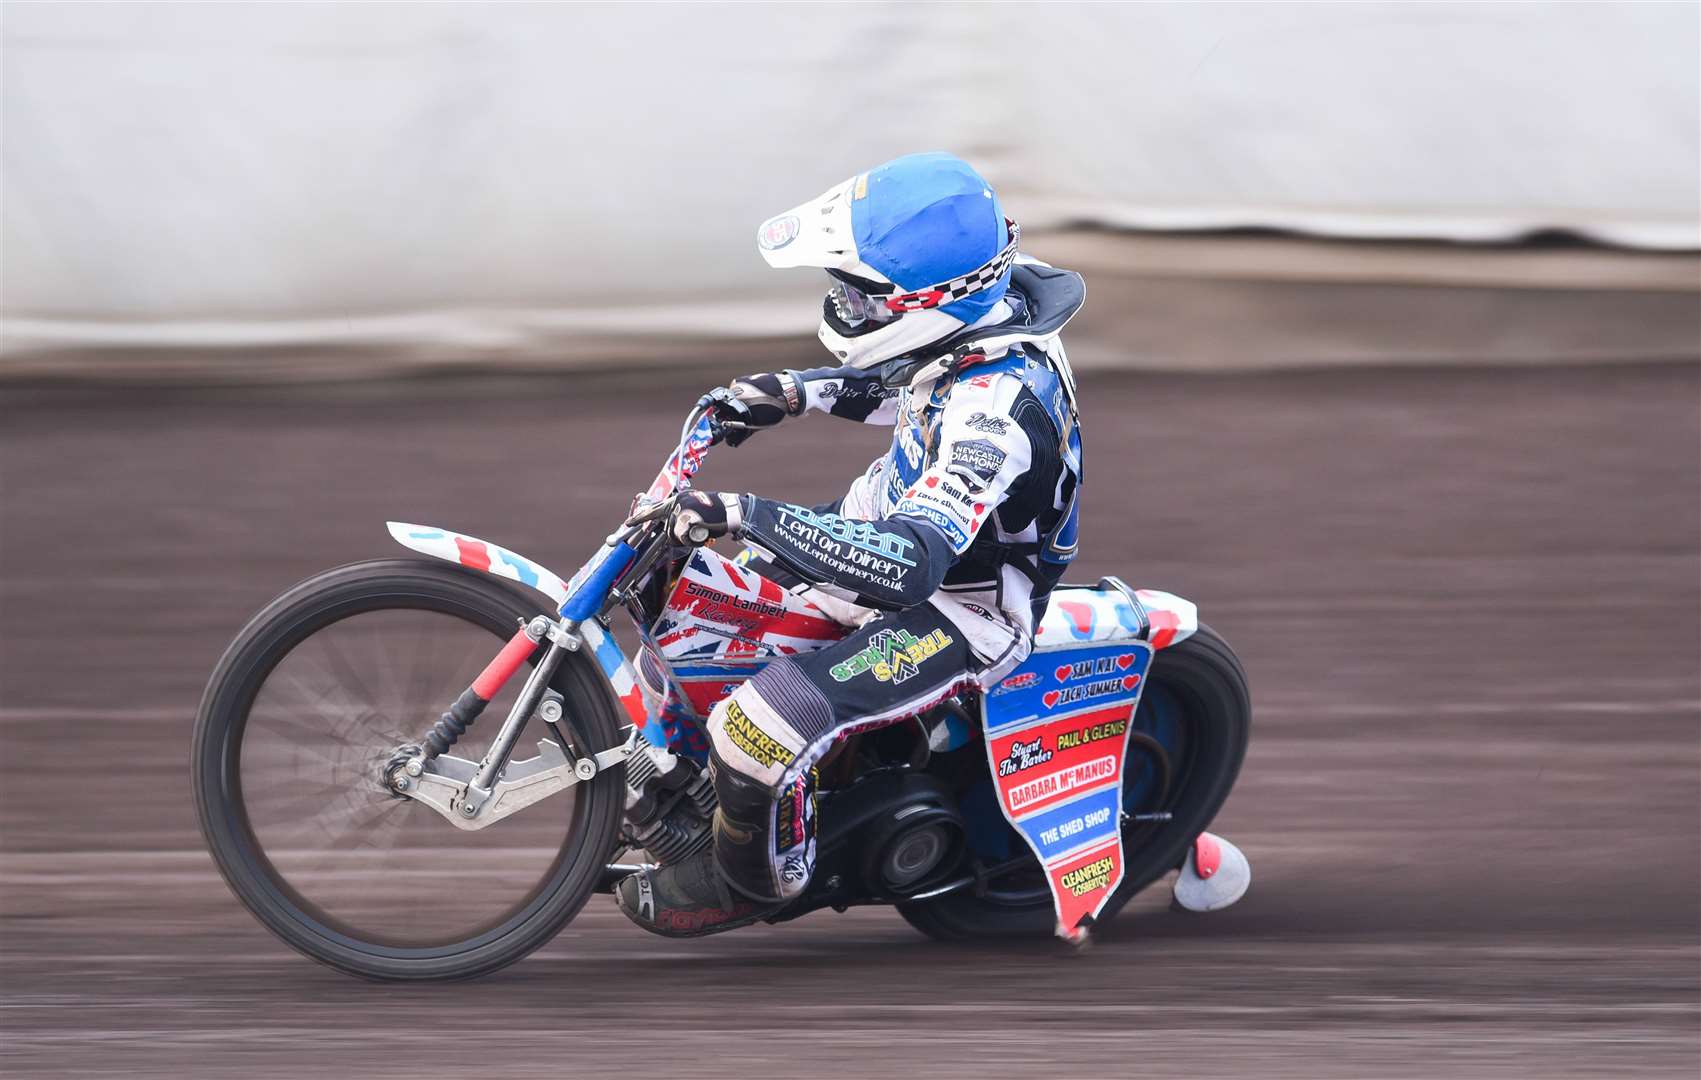 It was a tough first meeting back for Simon Lambert at Wolves last night.